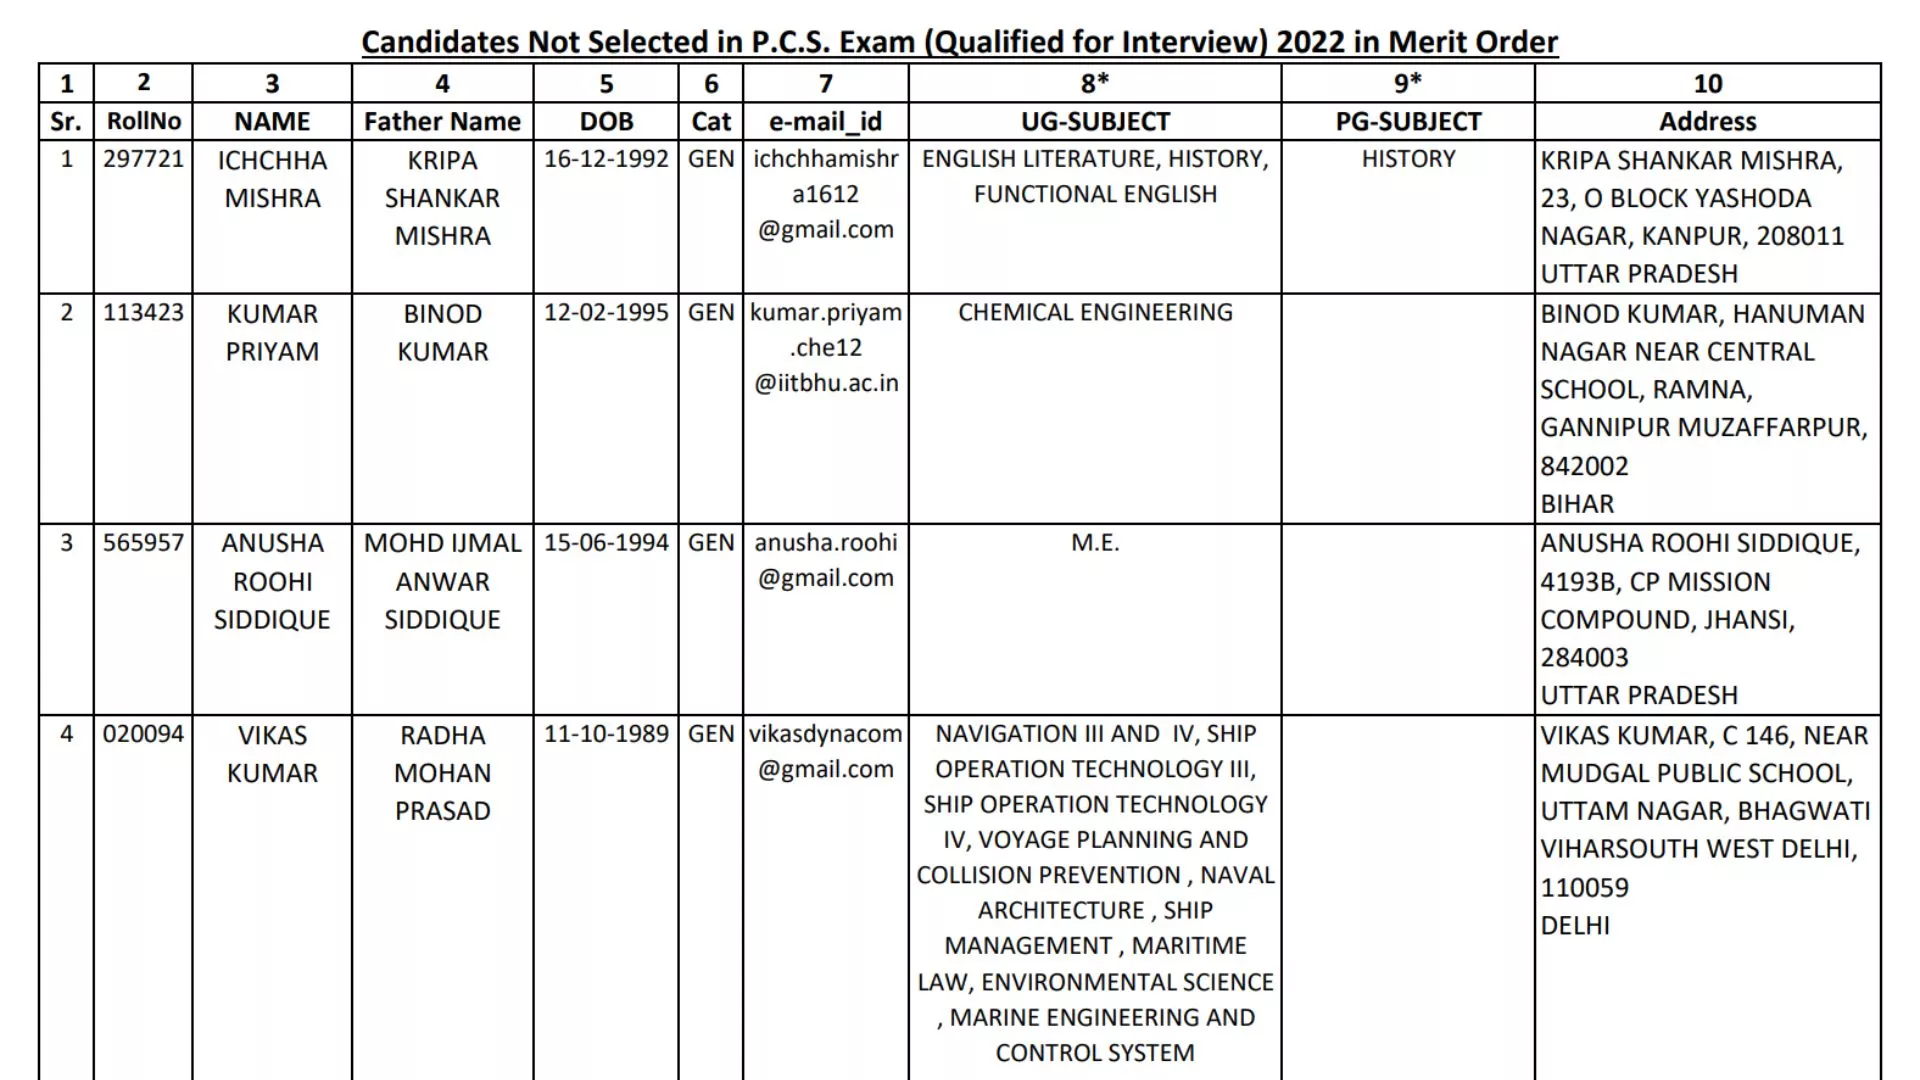 List of Candidates not selected in UPPCS 2022 but Qualified for Interview [PDF]